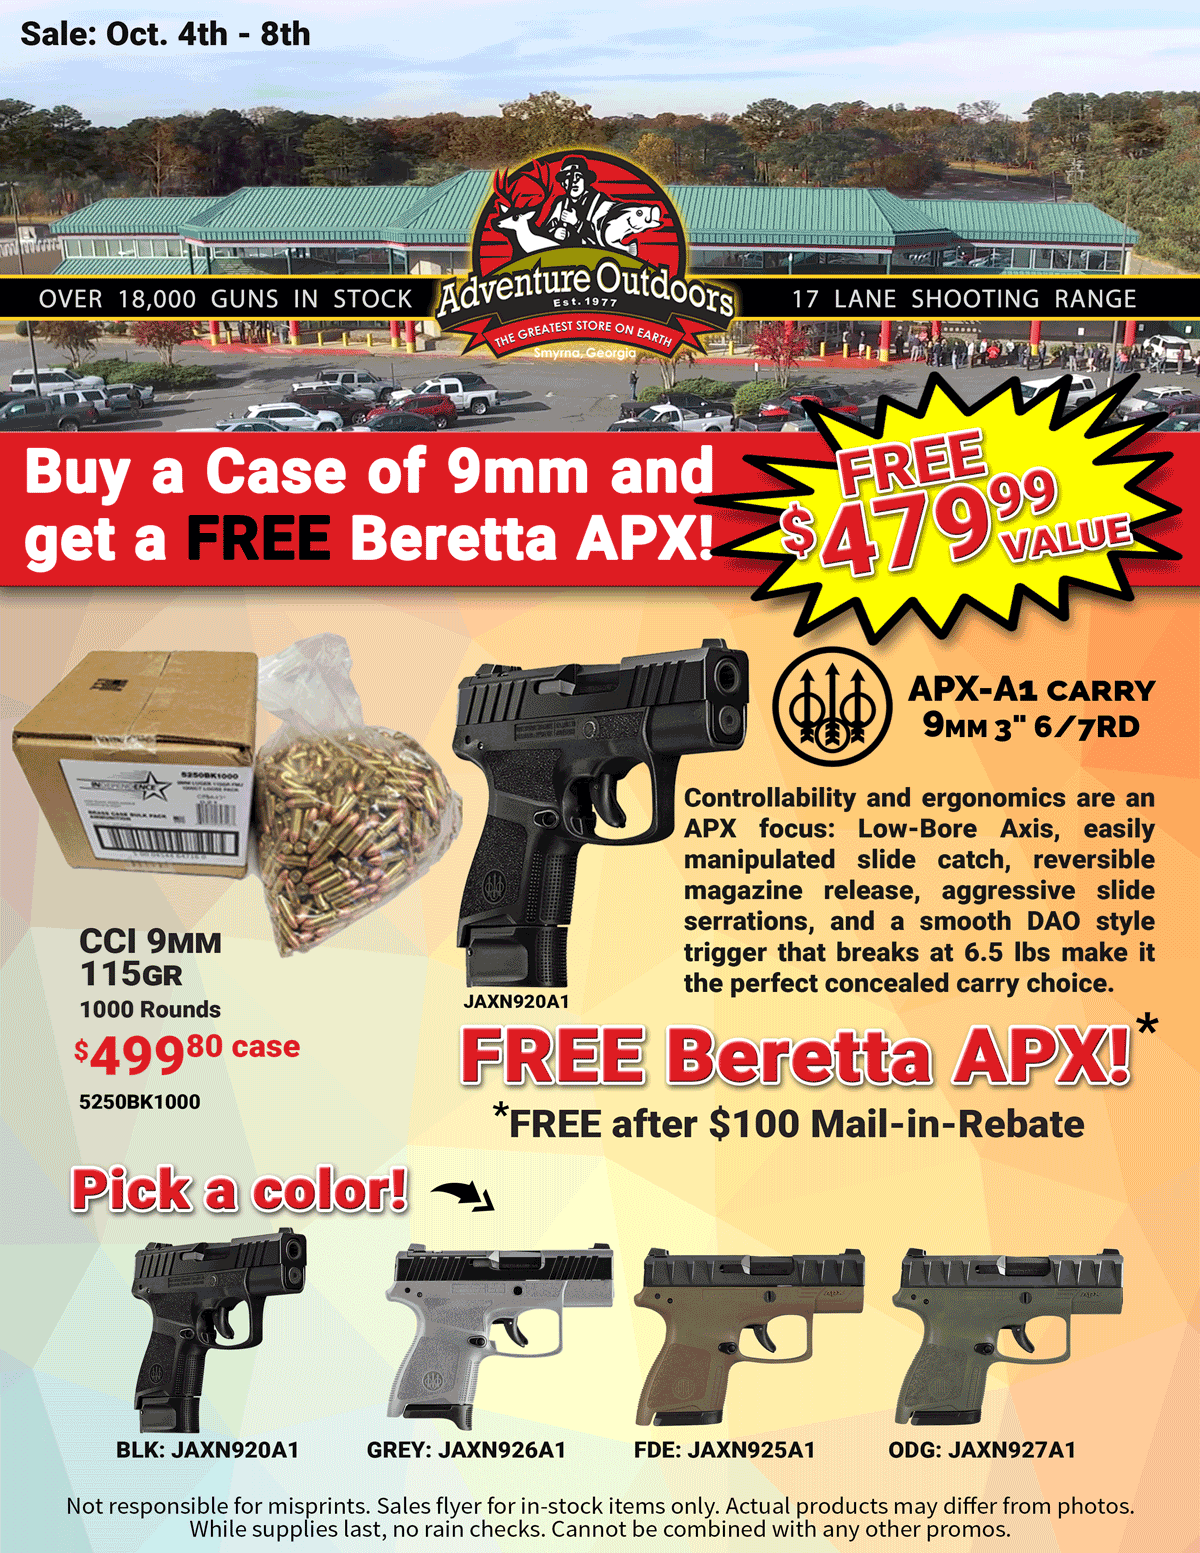 Buy the Ammo get the Guns FREE!